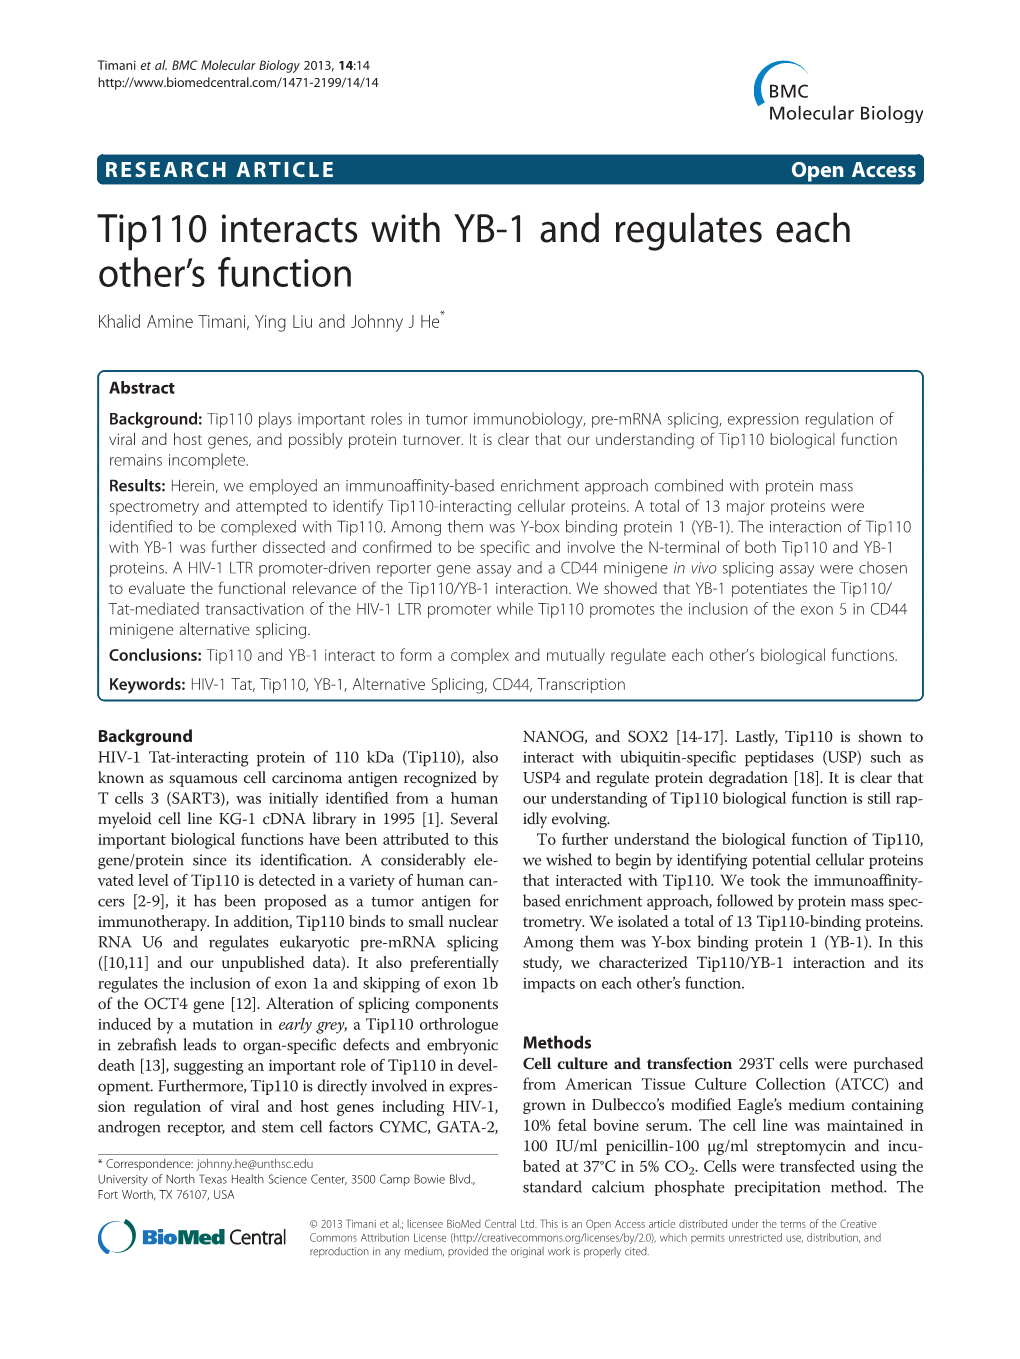 Tip110 Interacts with YB-1 and Regulates Each Other's Function